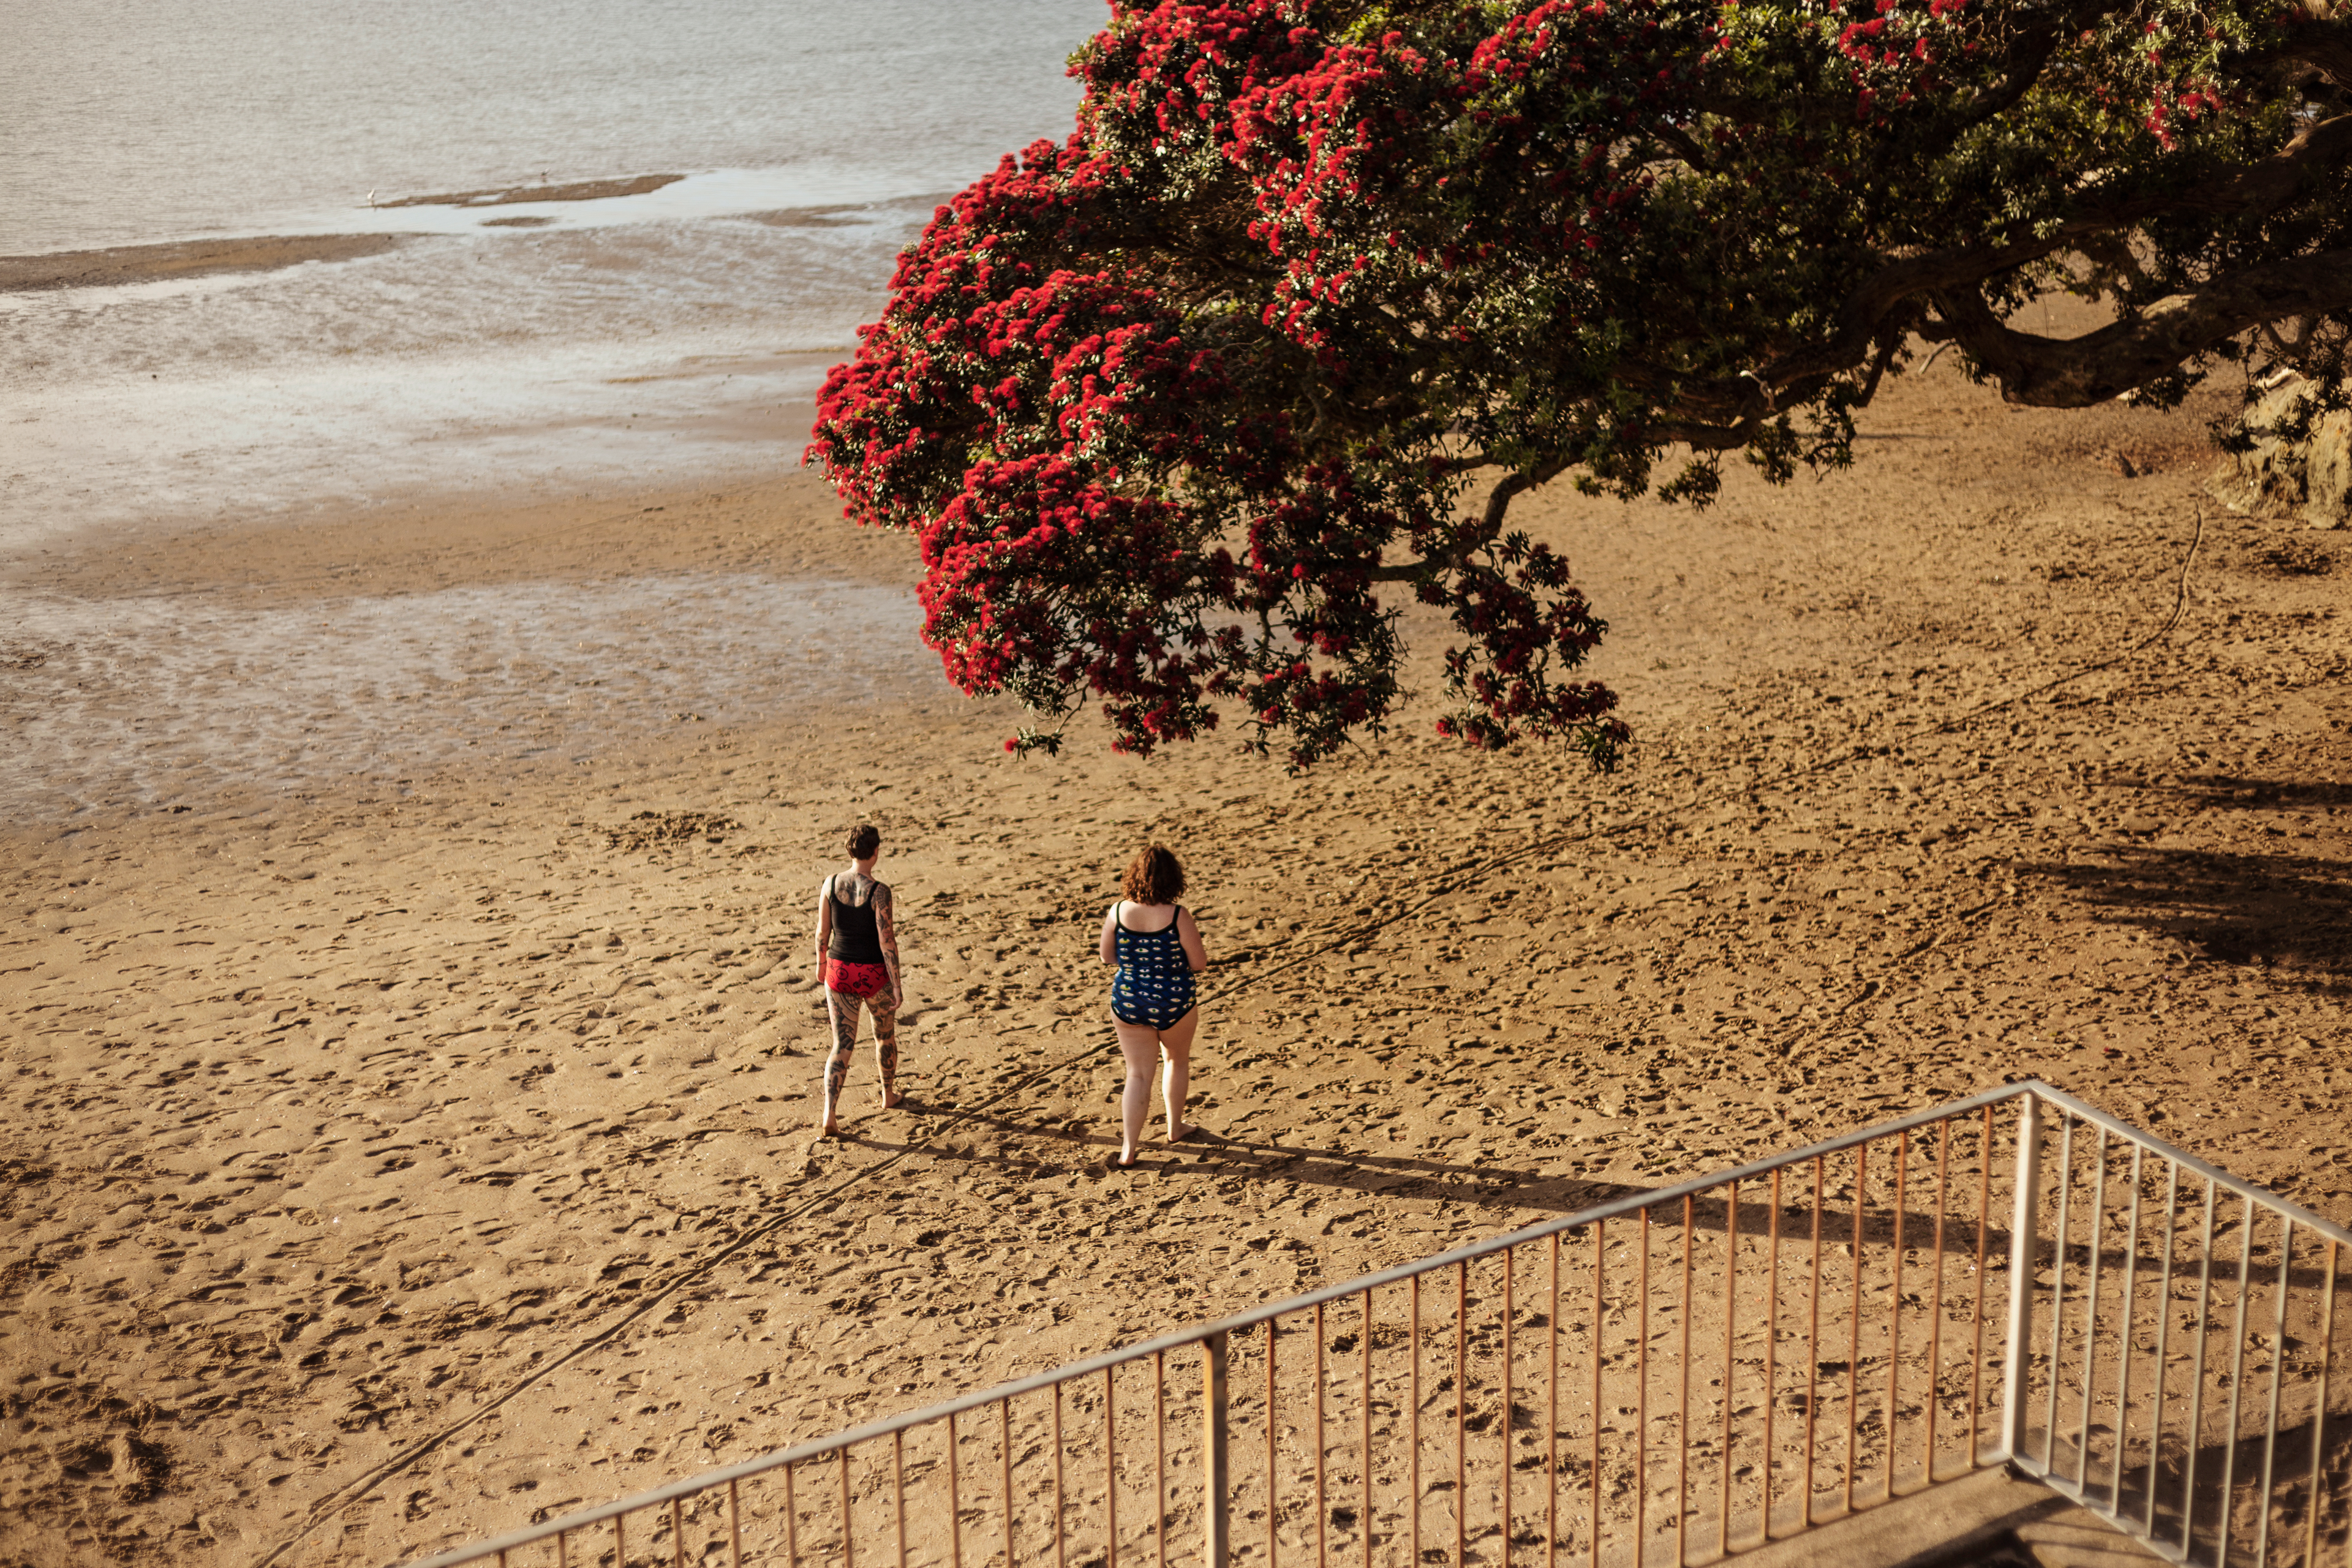 Two people on a beach in Thunderwear with Pohutukawa in the foreground.